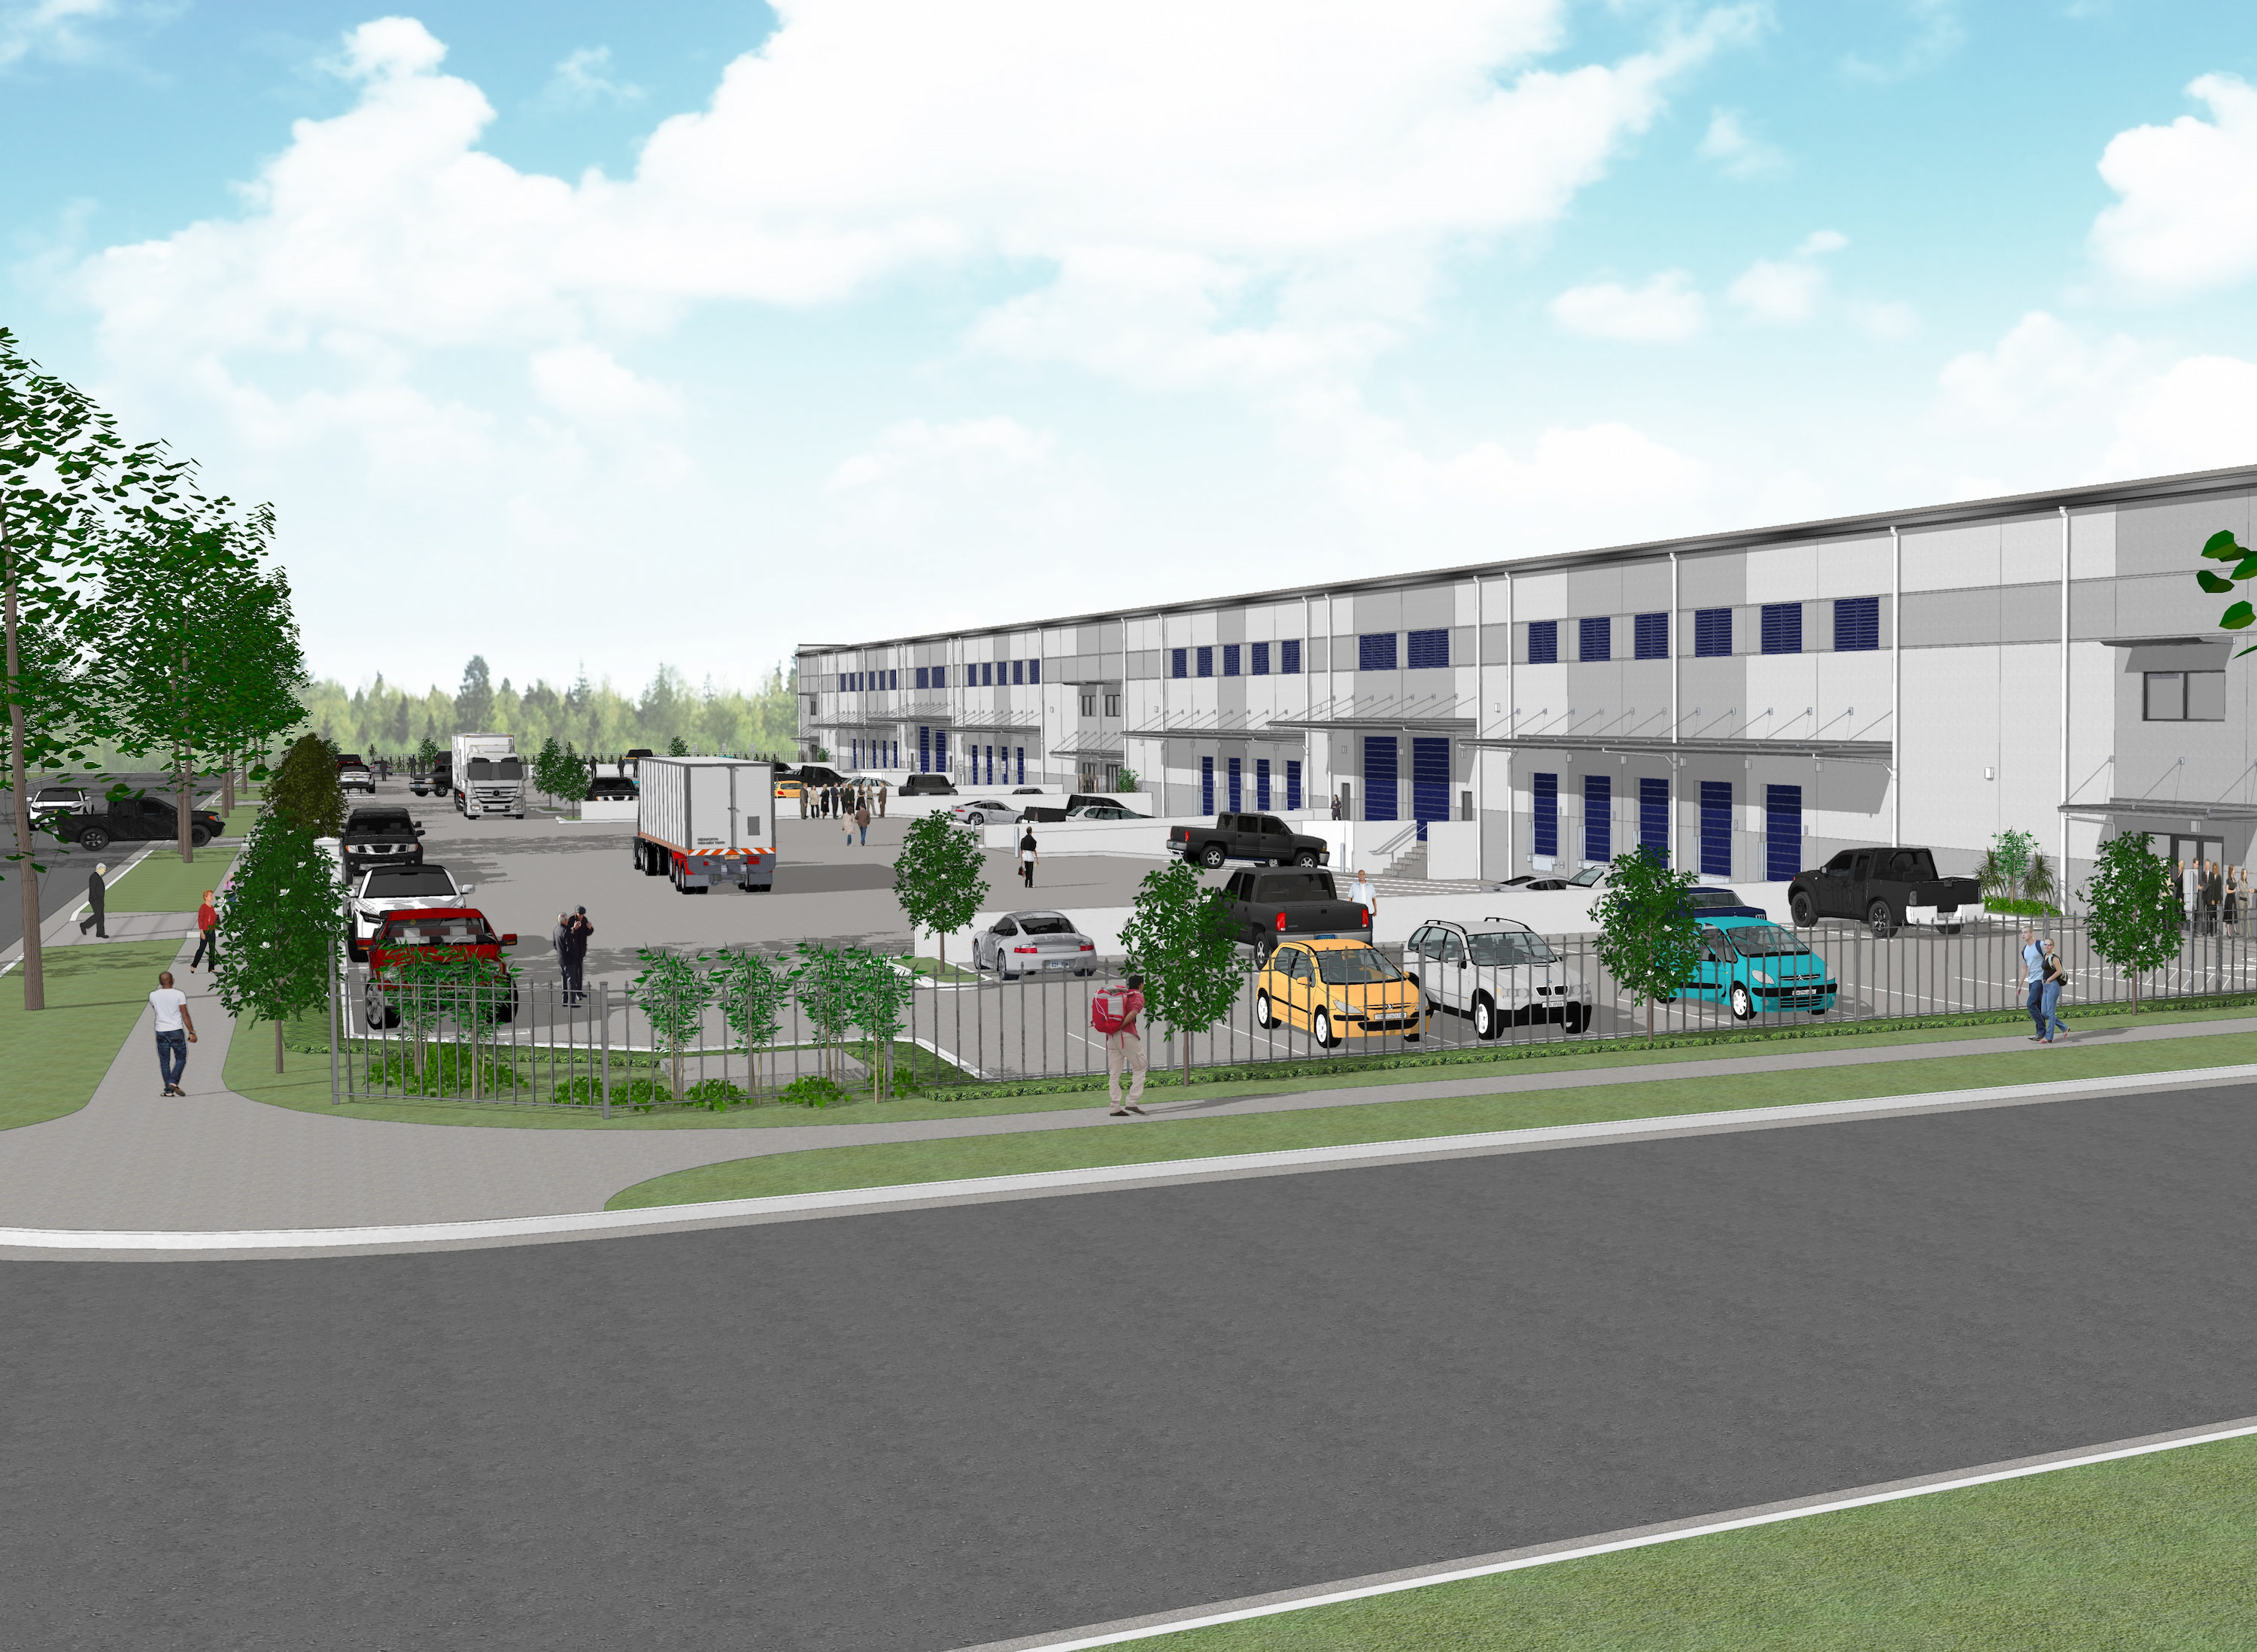 Mockup rendering of the warewhouse facility.